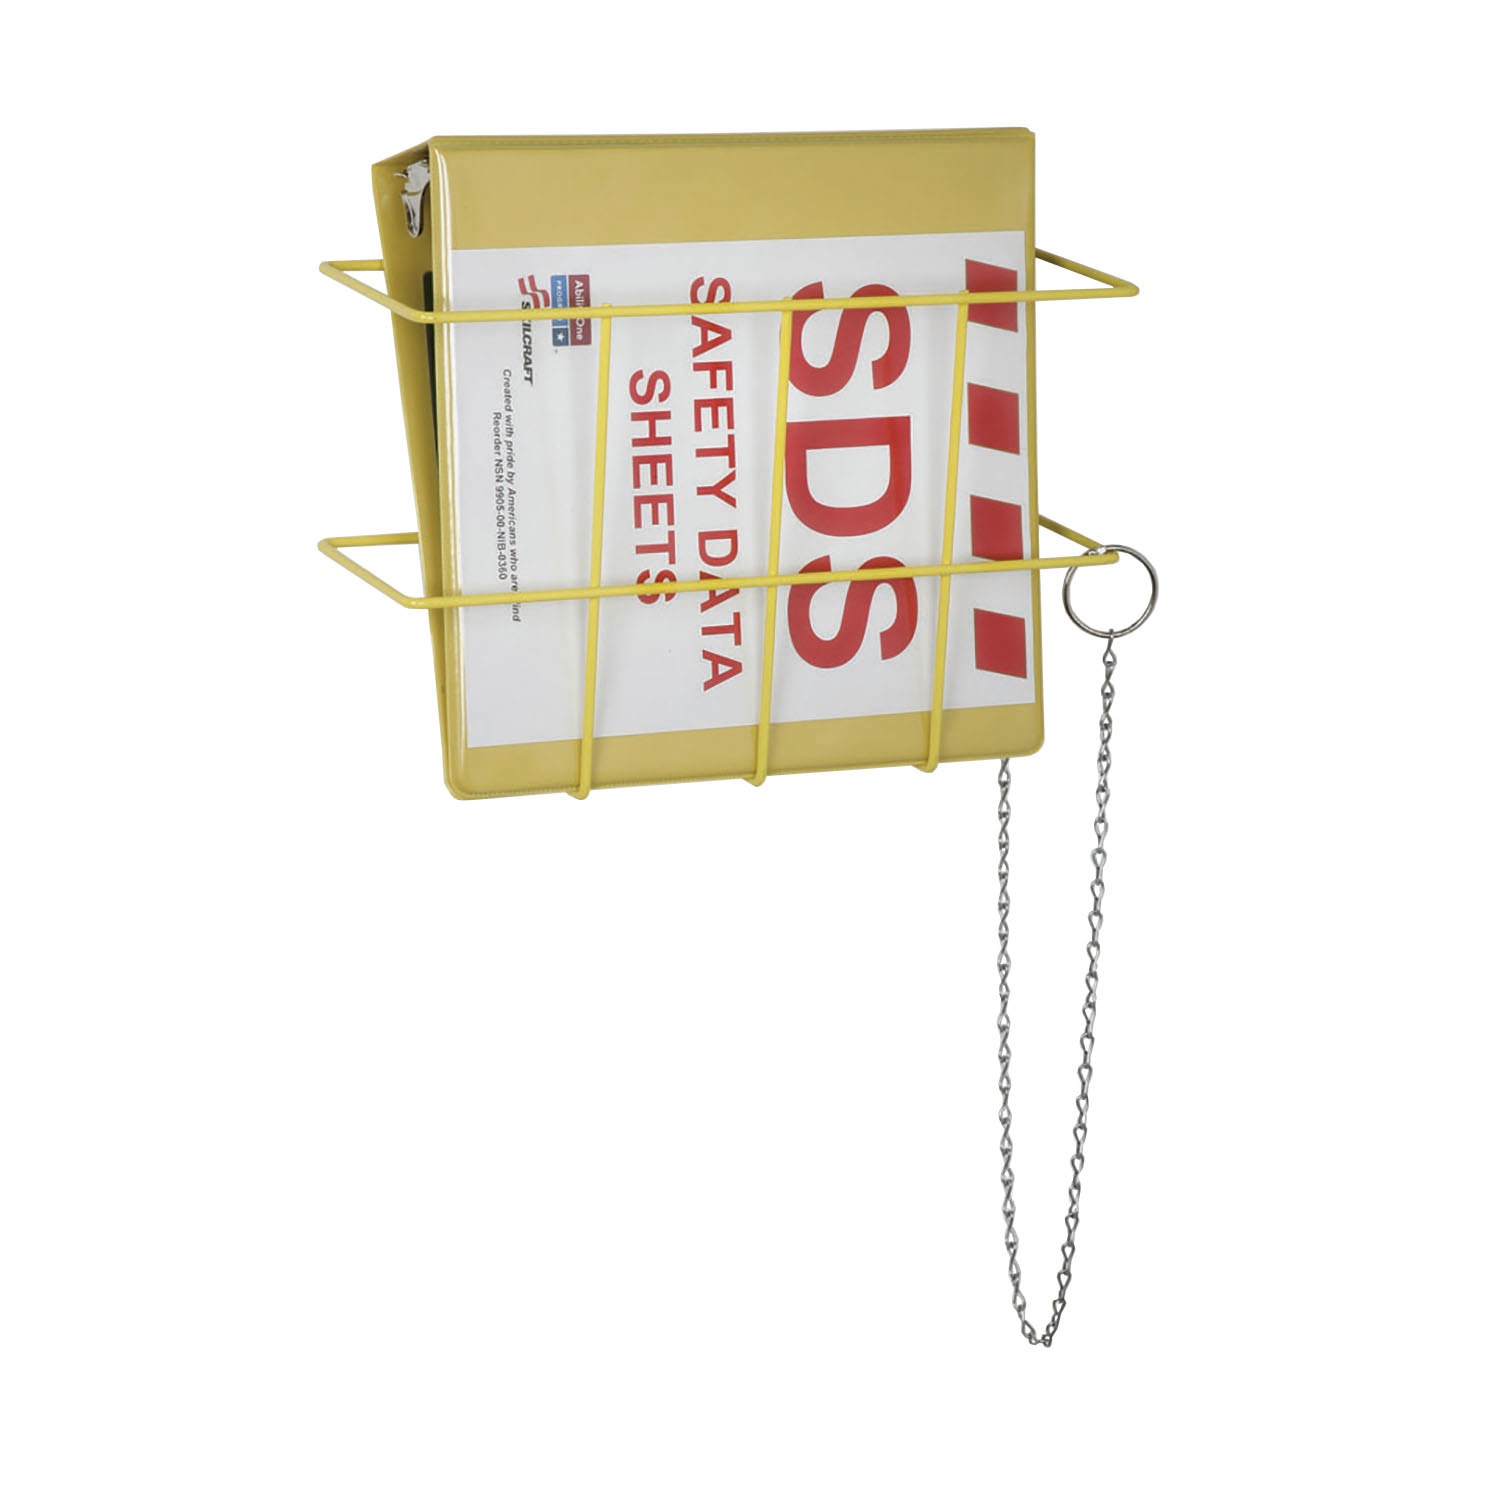 Binder with Wire Rack Holder, GHS, Safety Data Sheets